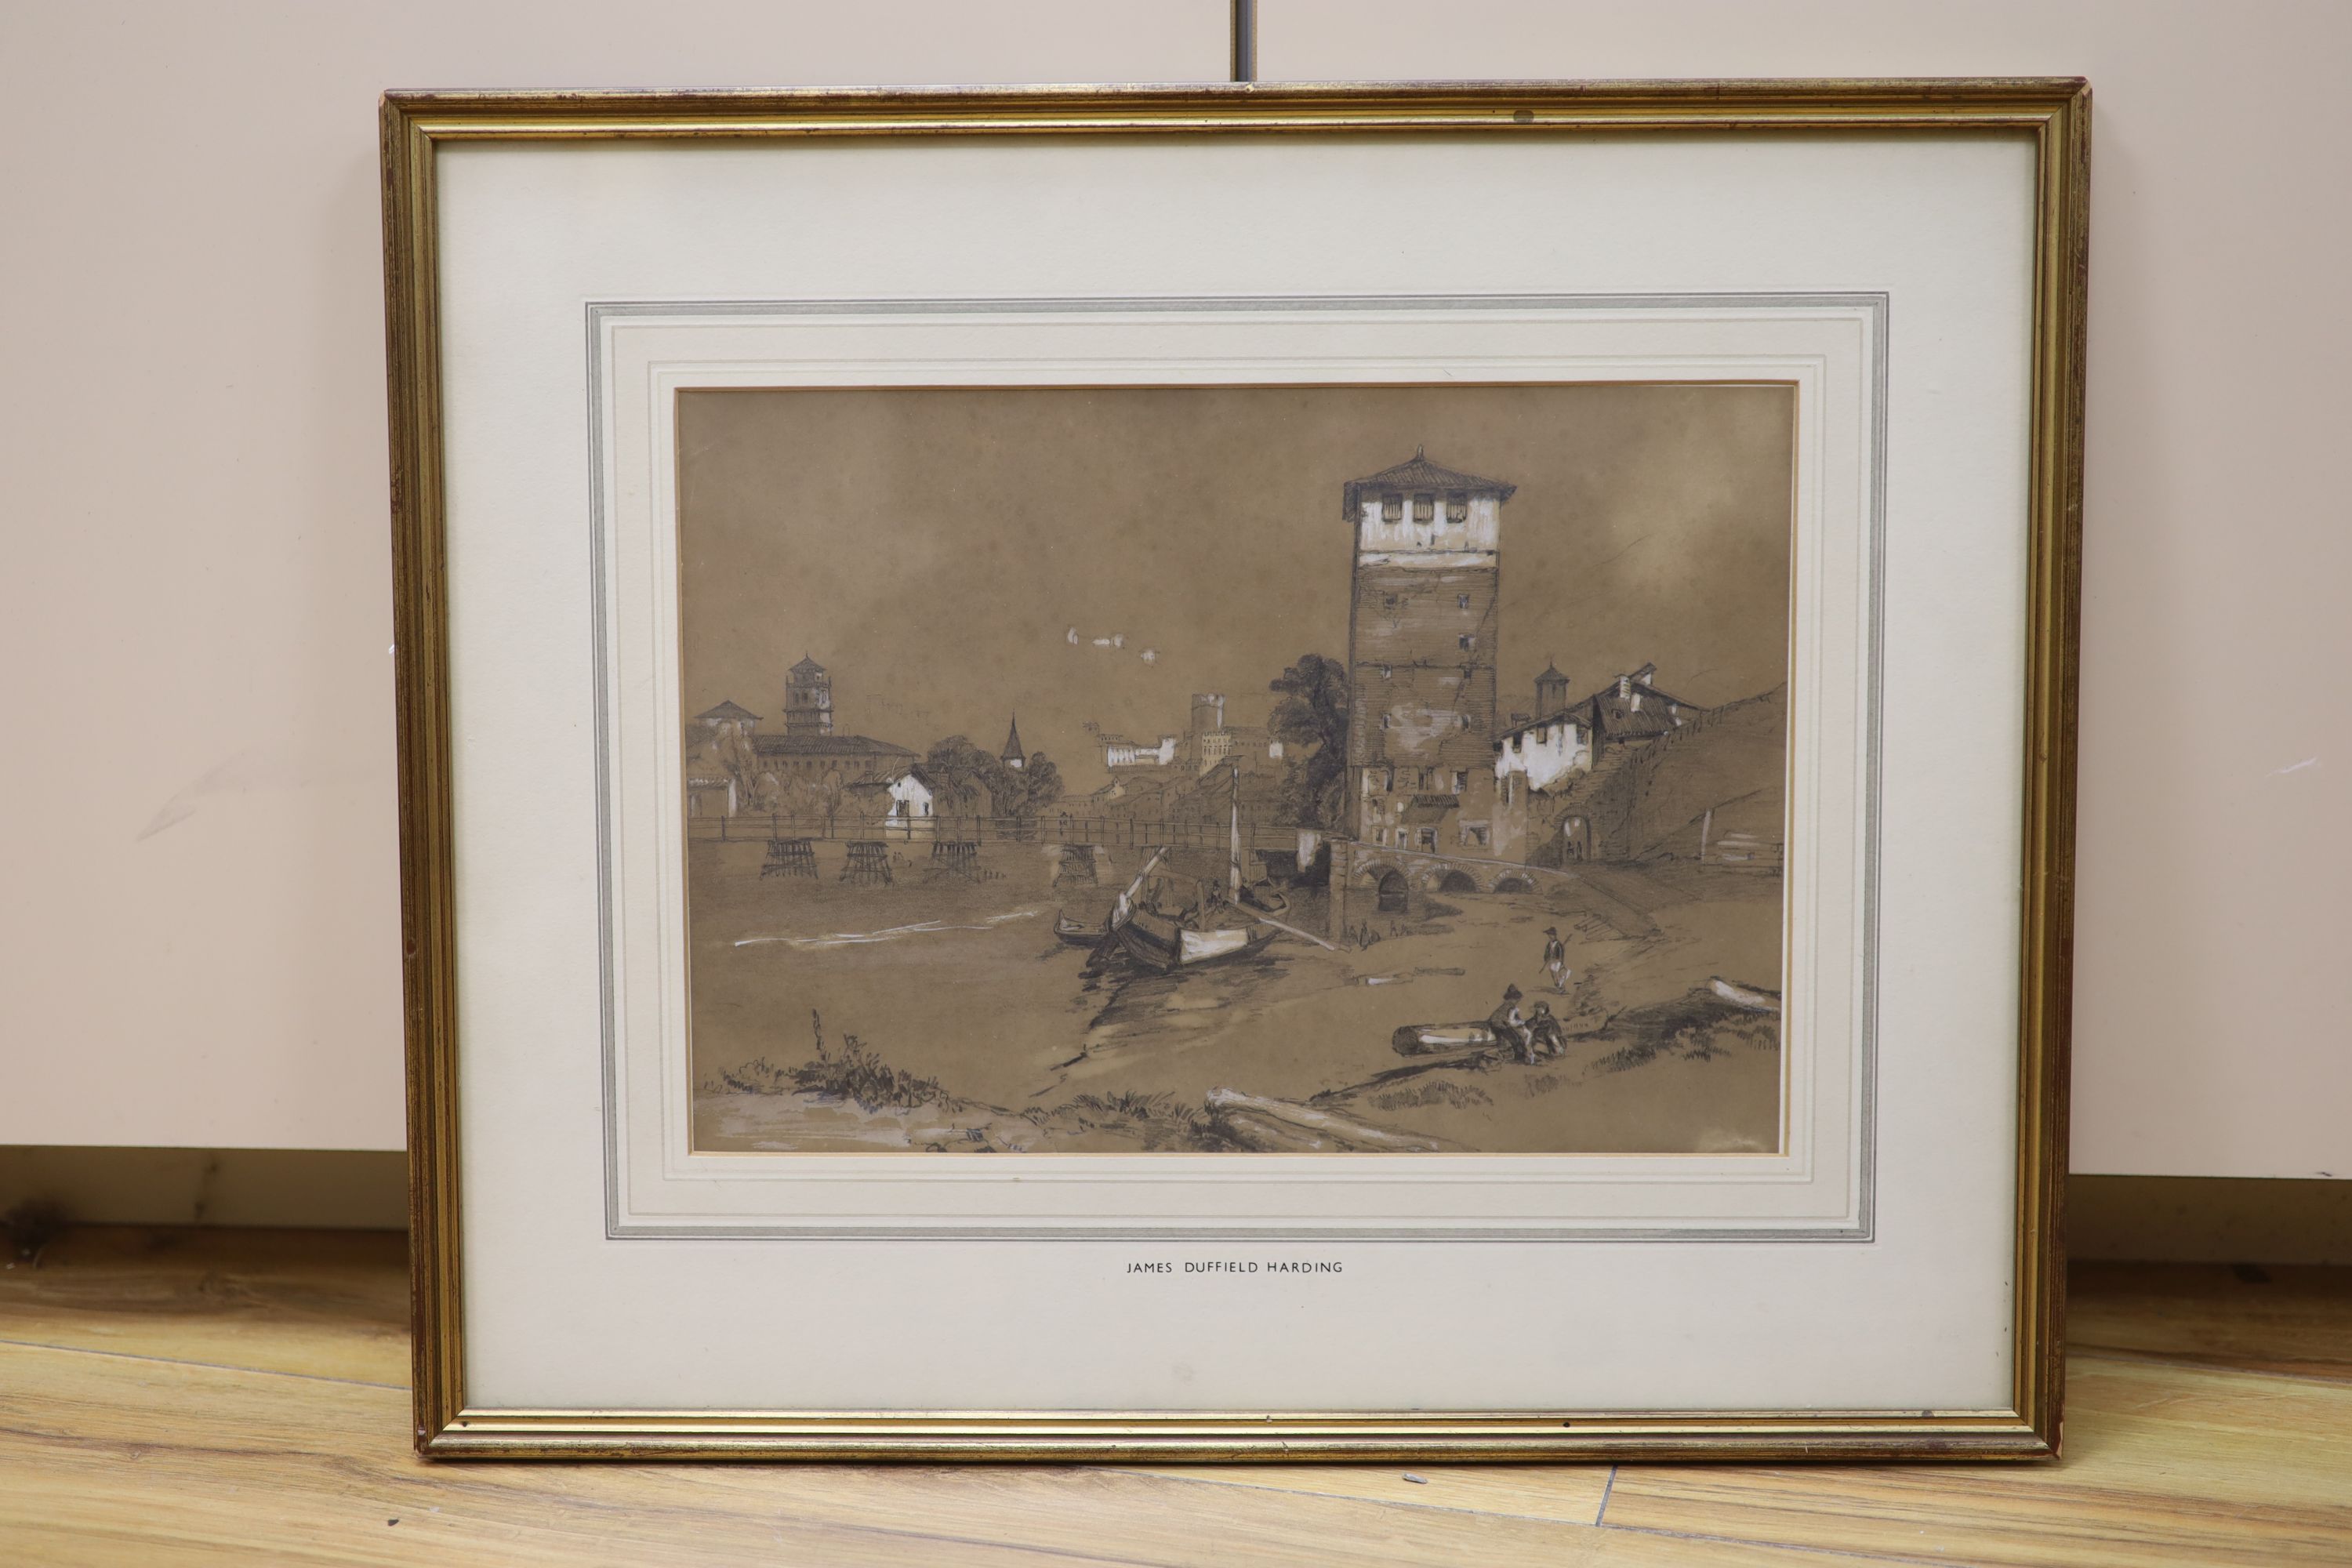 Attributed to James Duffield Harding, pencil heightened with wash, Continental riverside town, 23 x 33cm